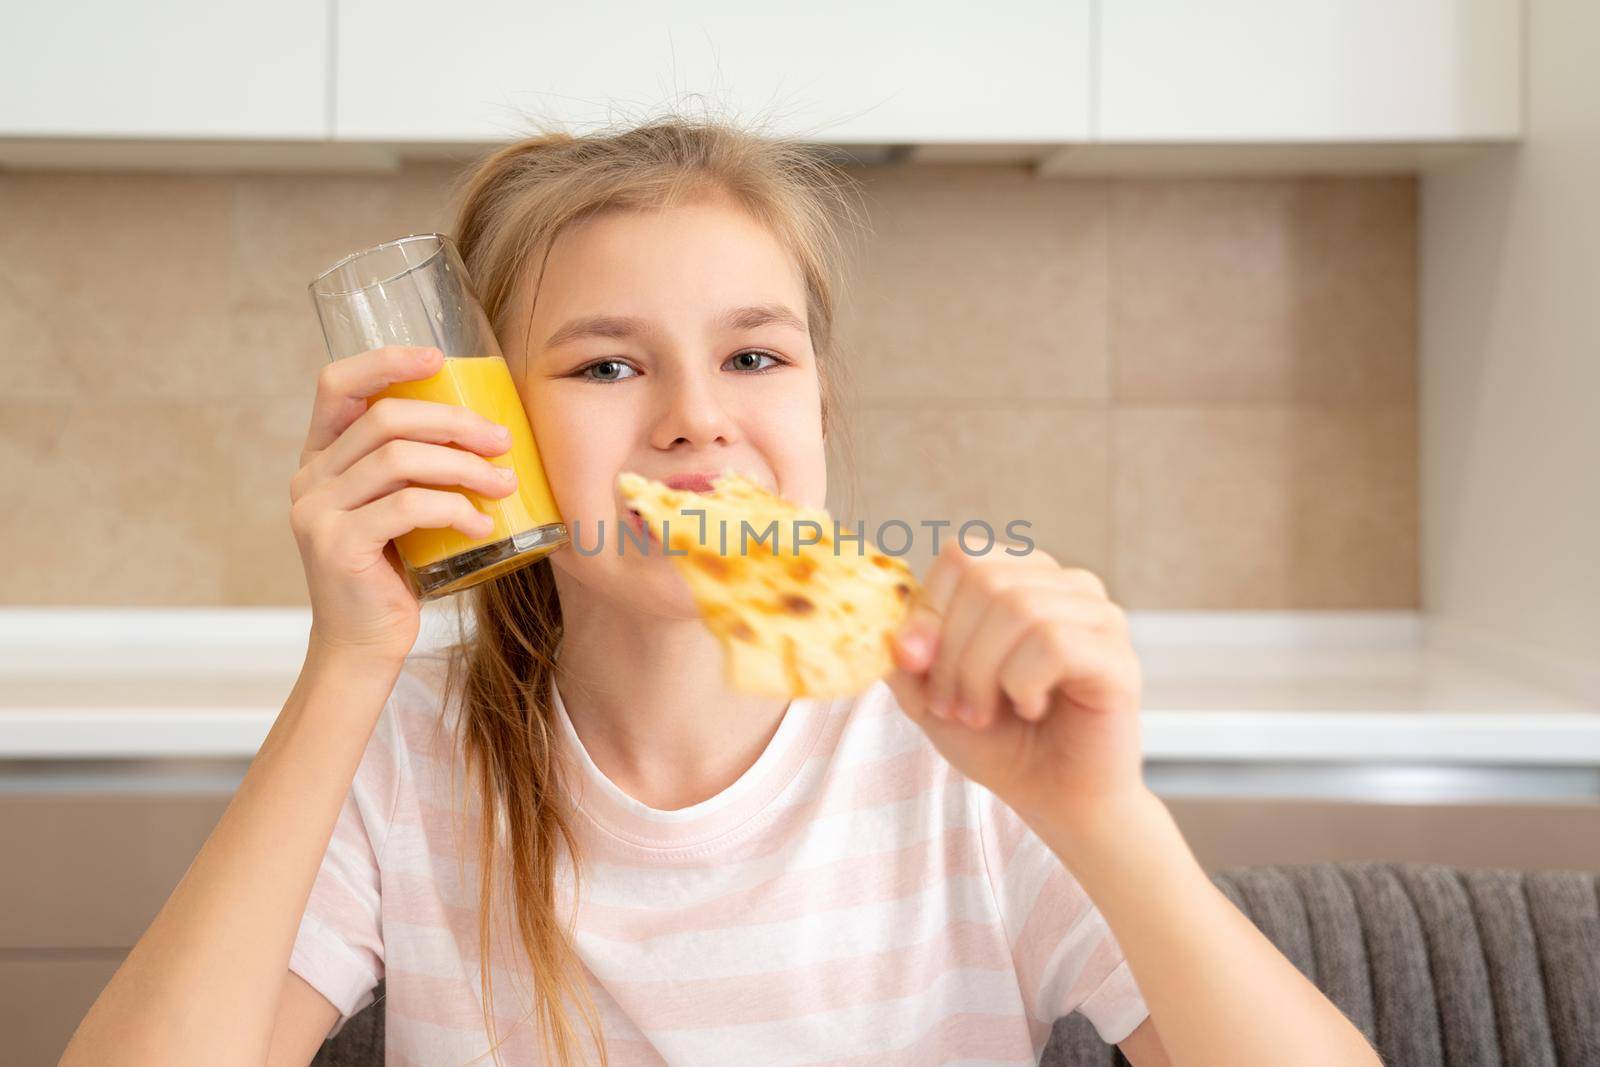 Girl eating a slice of pizza. High quality photo